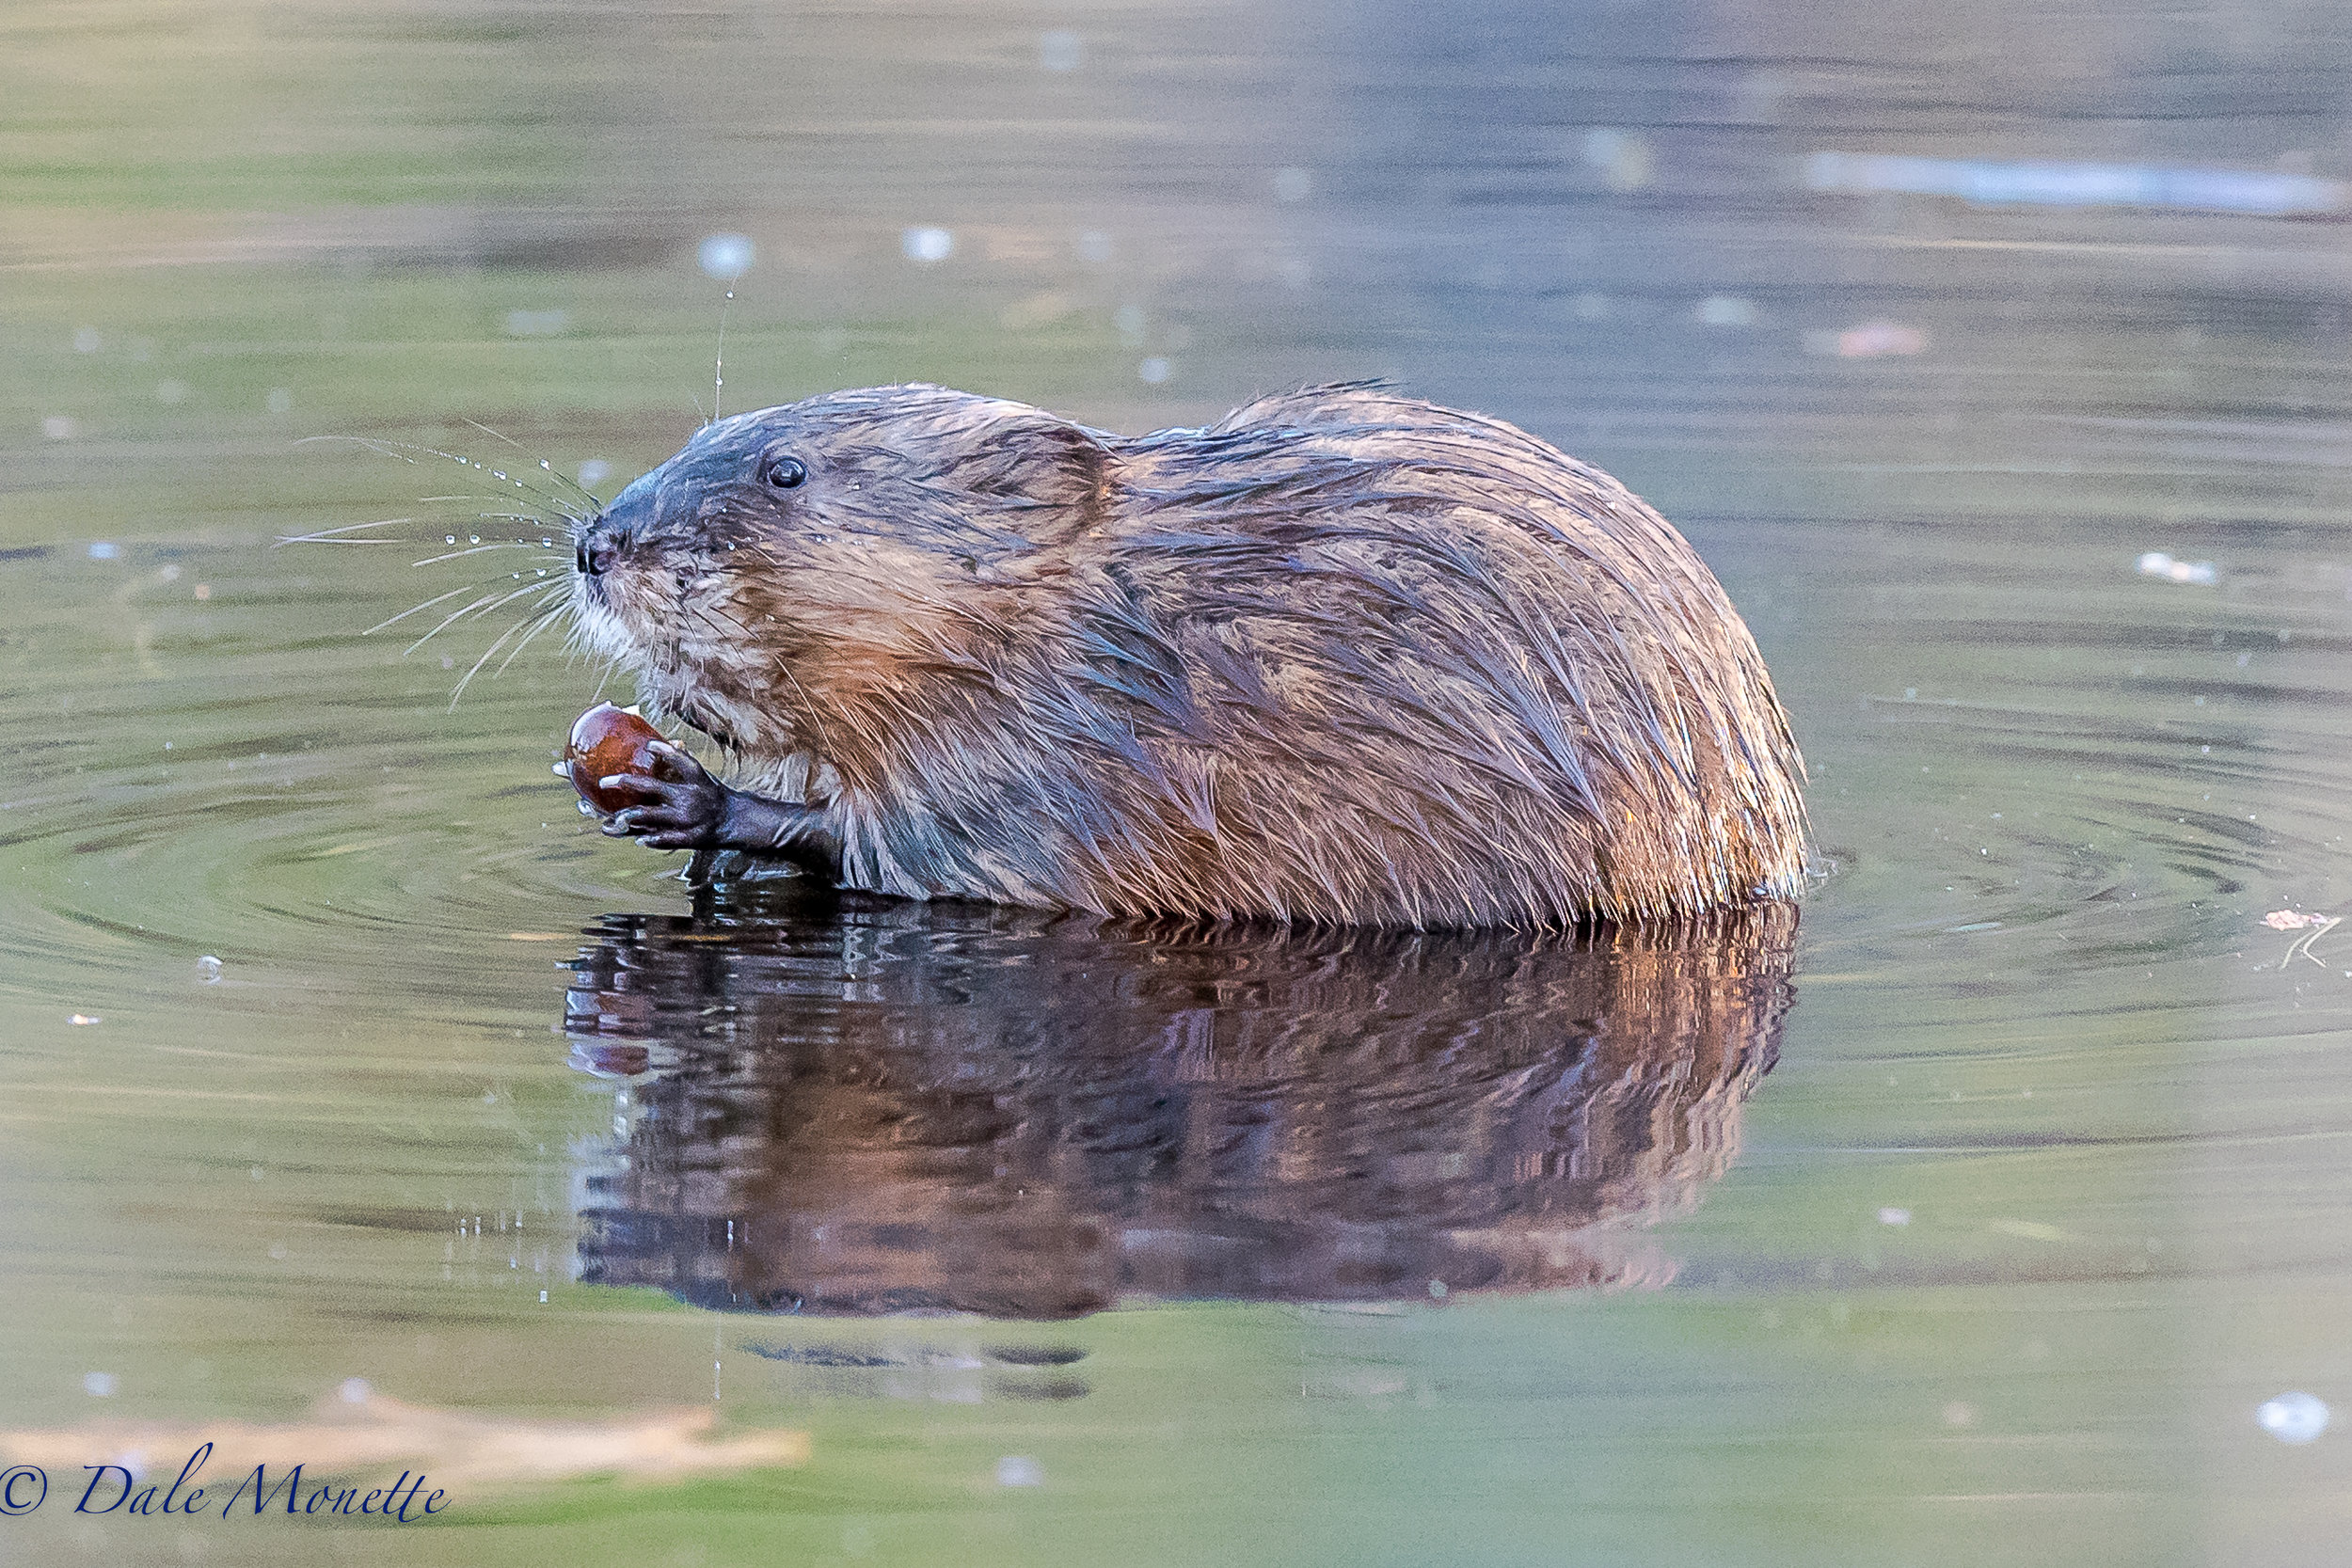   This little muskrat popped up twice this week as I have been living in a swamp with the beavers ! He eats a few acorns floating in the water then goes along his merry way.. 5/5/17  